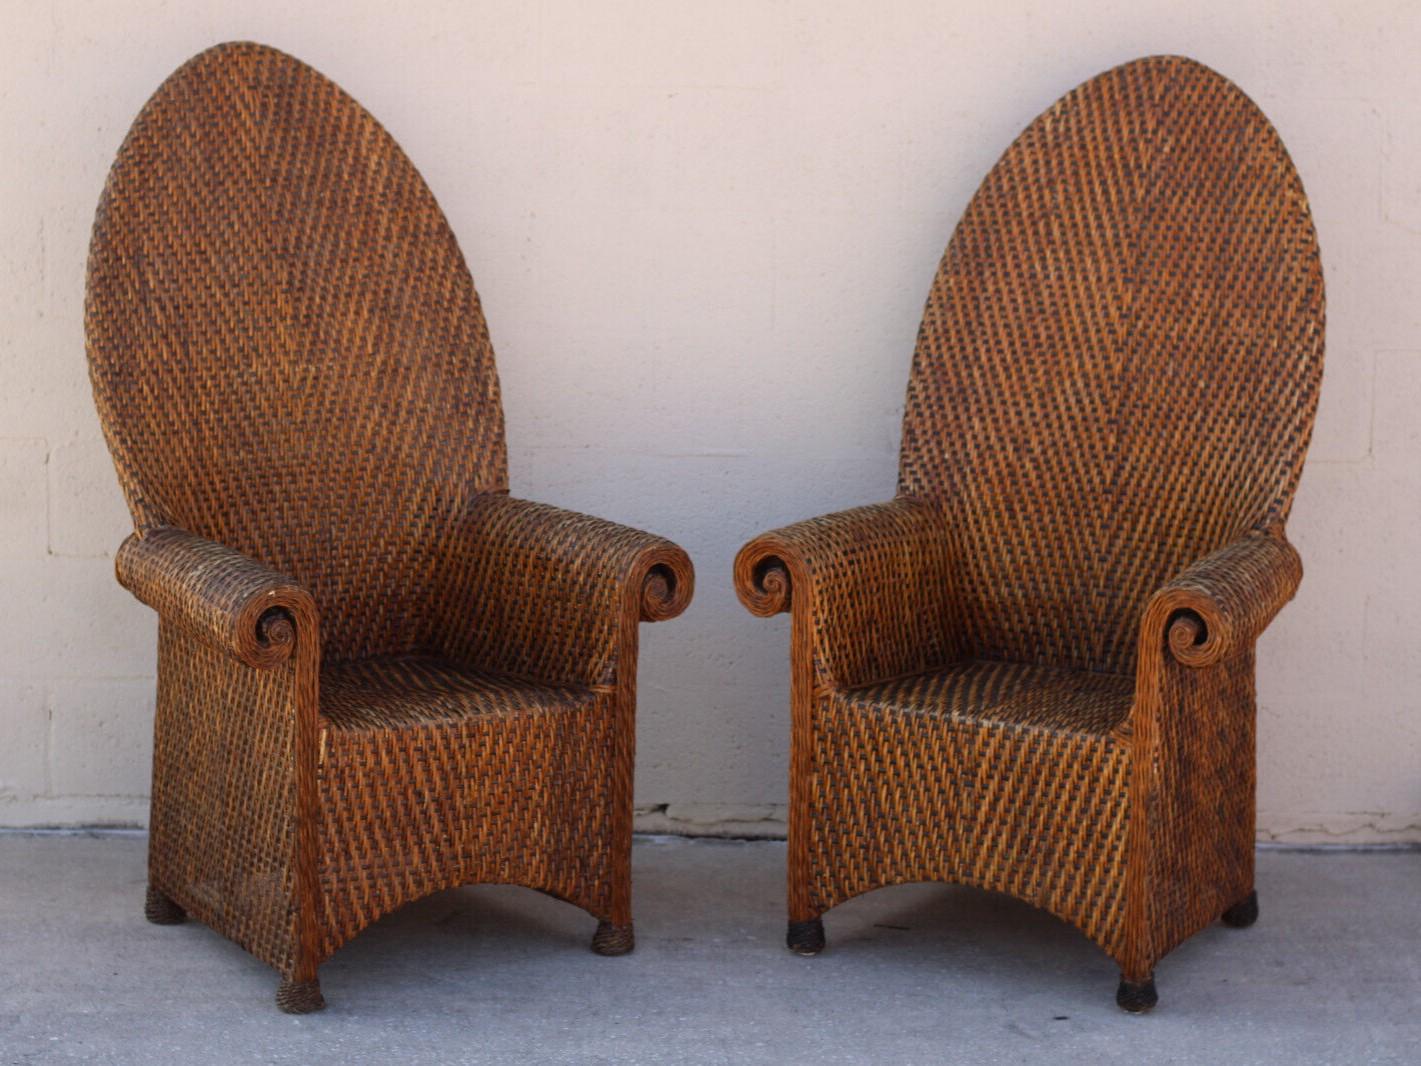 A pair of rolled-arm woven rattan armchairs with tall arched backs. The combination of light brown and dark brown wicker, with darker wicker feet, creates a beautiful contrast. These stunning rattan throne chairs are in good vintage as-found